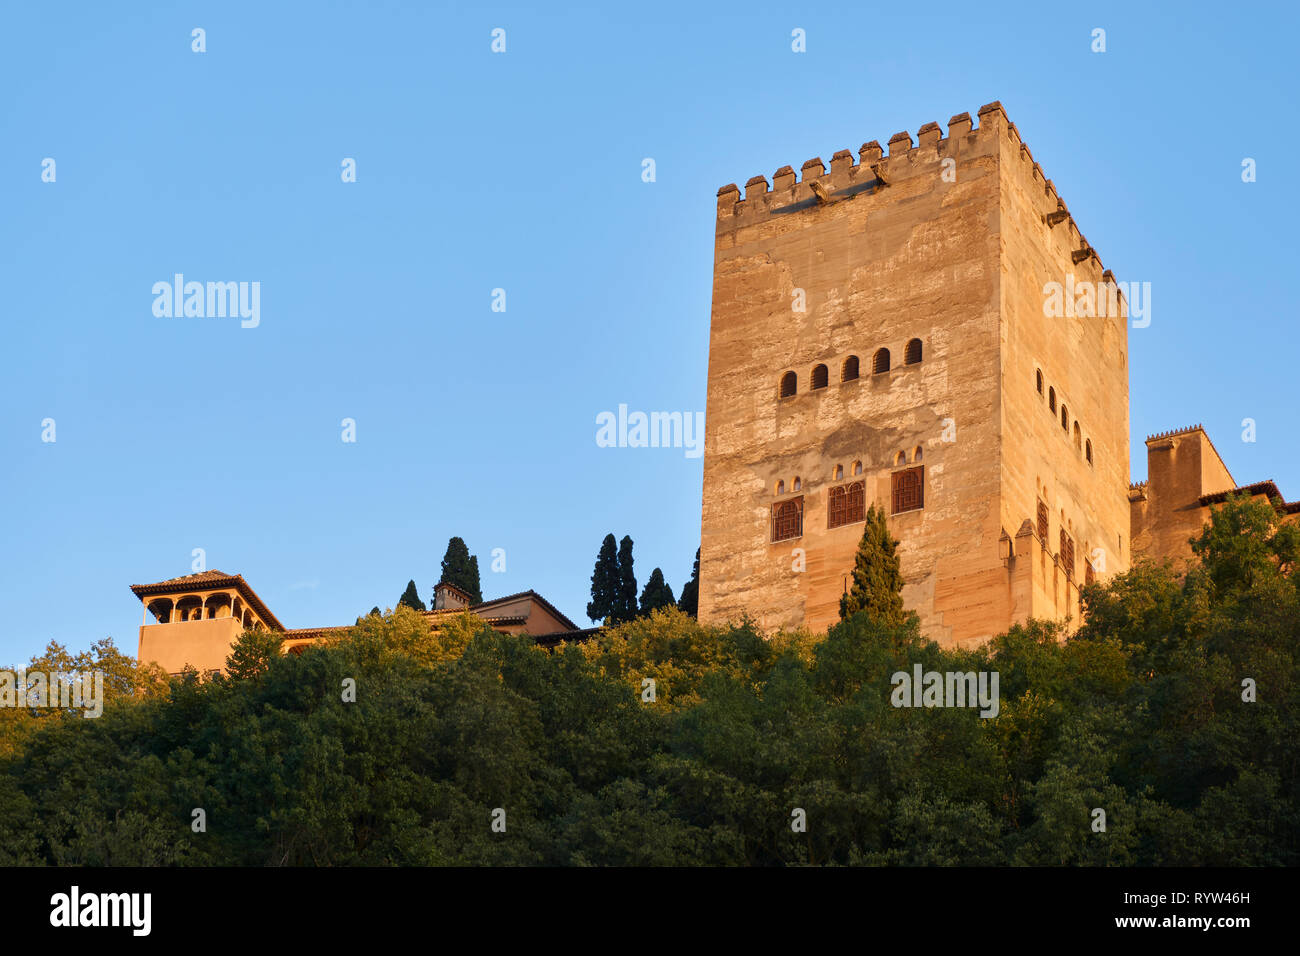 Exterior view of the Comares Tower in the Alhambra in Granada. Spain Stock Photo